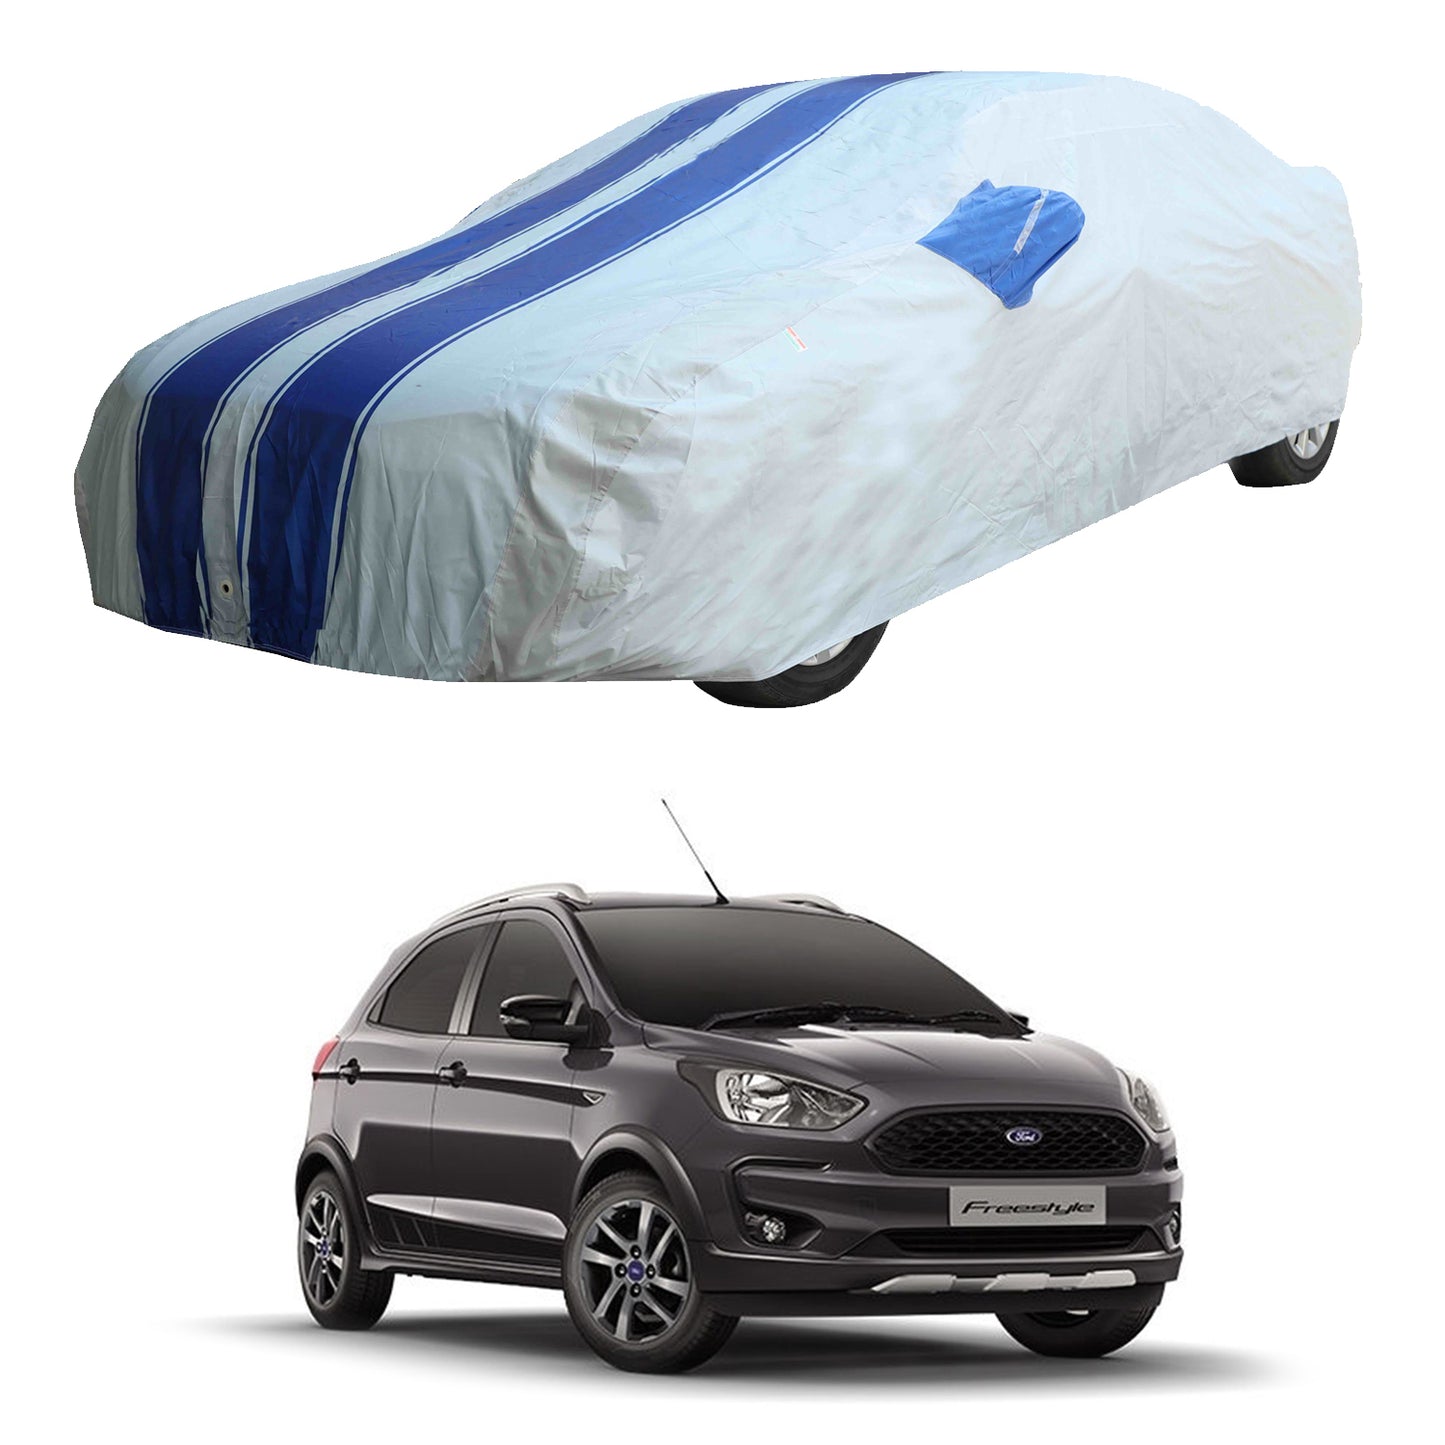 Oshotto 100% Blue dustproof and Water Resistant Car Body Cover with Mirror Pockets For Ford Freestyle